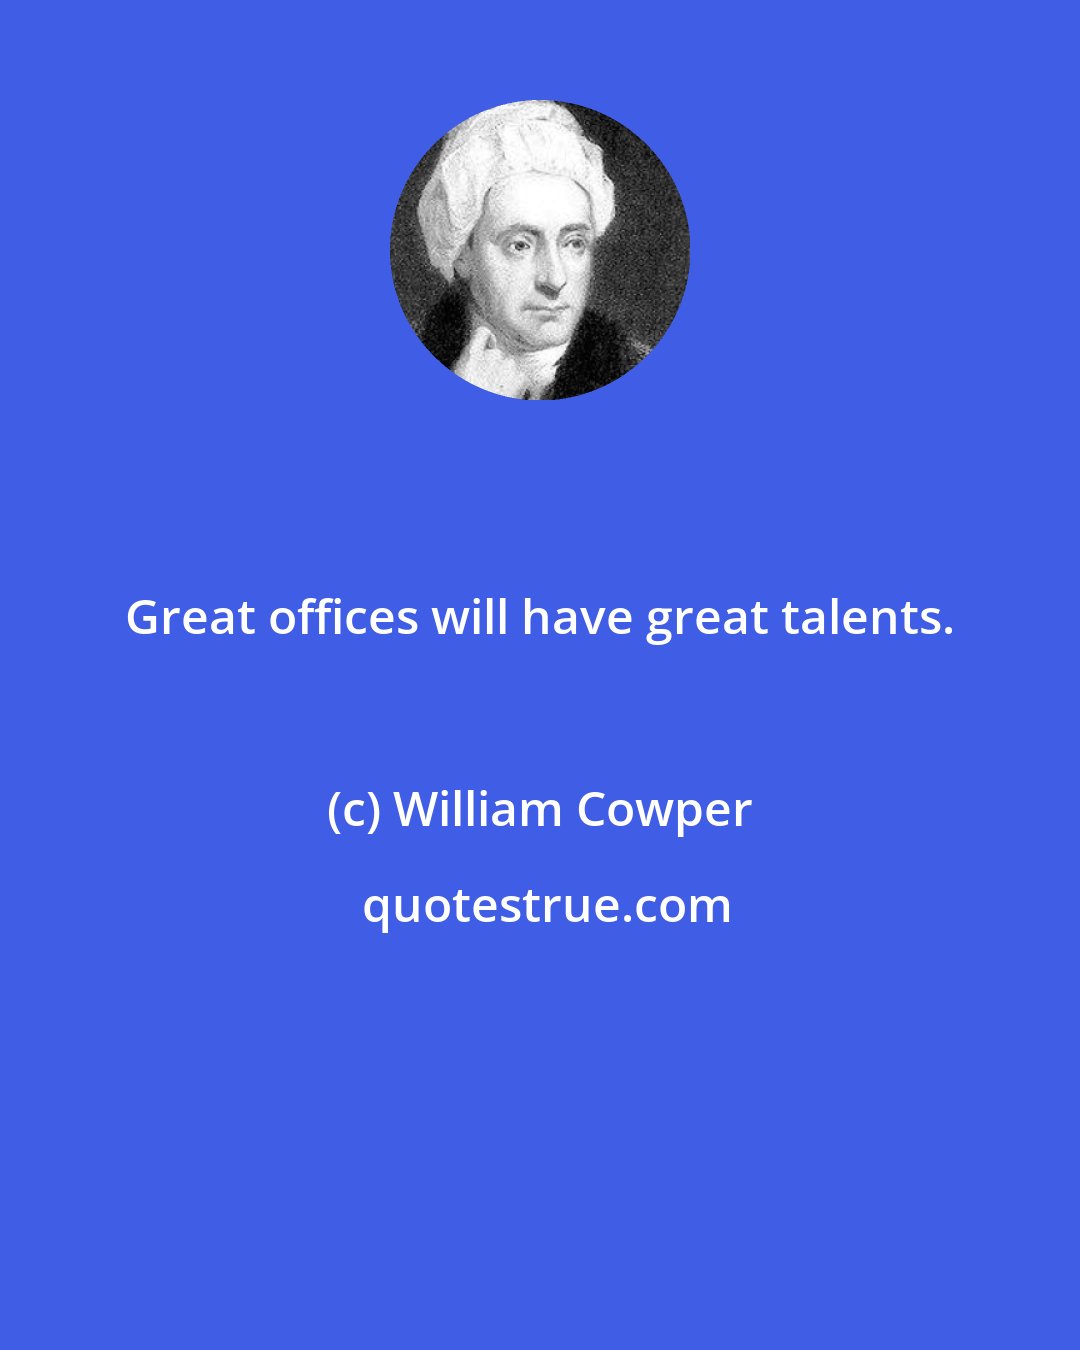 William Cowper: Great offices will have great talents.